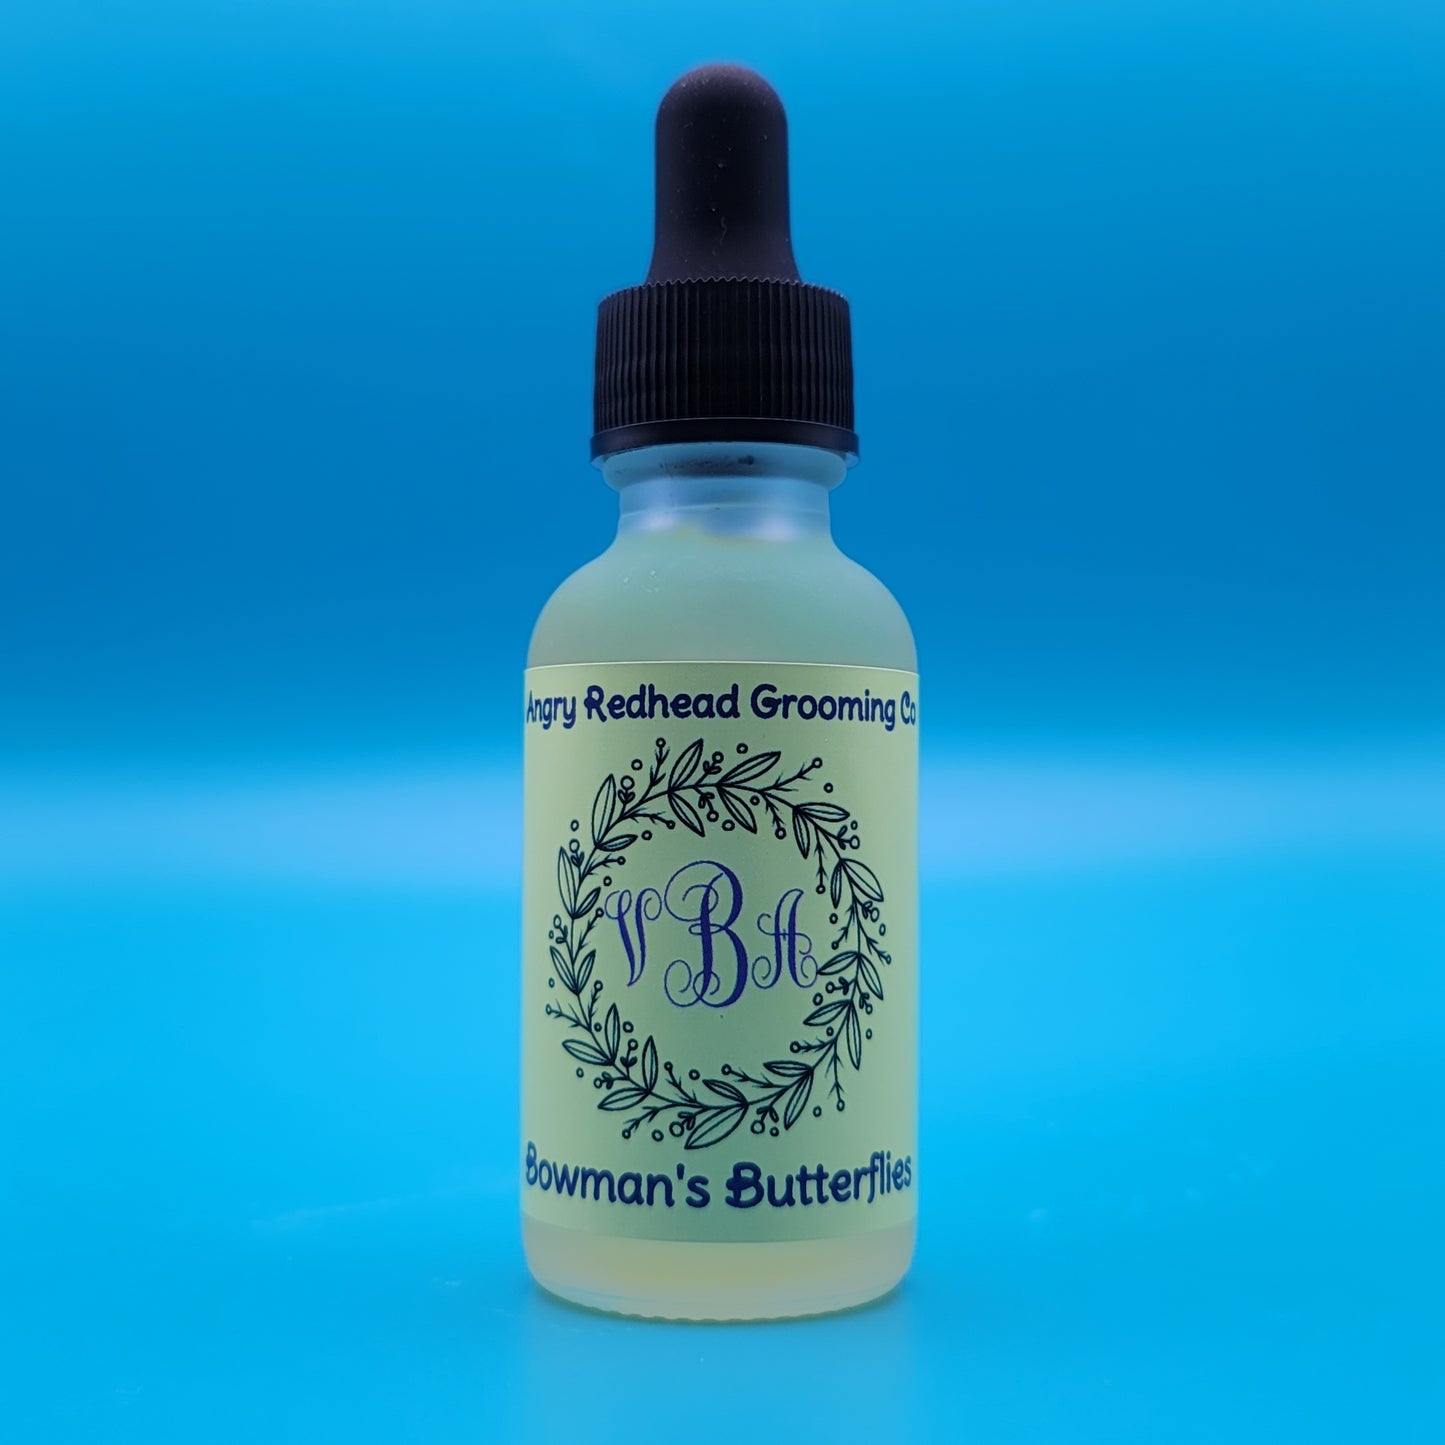 Bowman's Butterflies Pre-Shave Oil by Angry Redhead Grooming Co - angryredheadgrooming.com